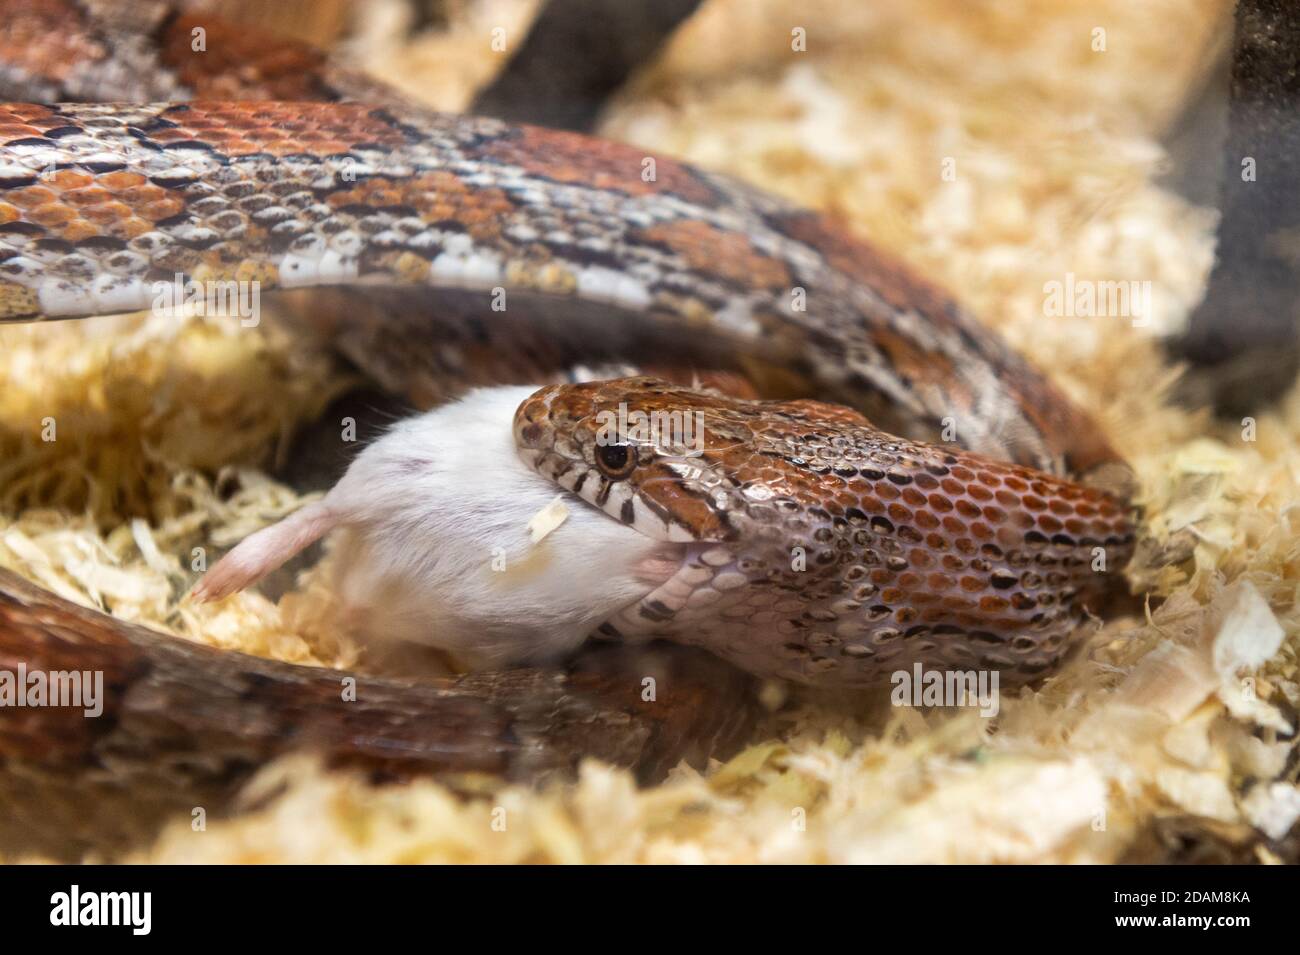 Domestic Corn Snake - Pantherophis guttatus - eats a meal of a dead mouse in a tank in a pet shop. Stock Photo